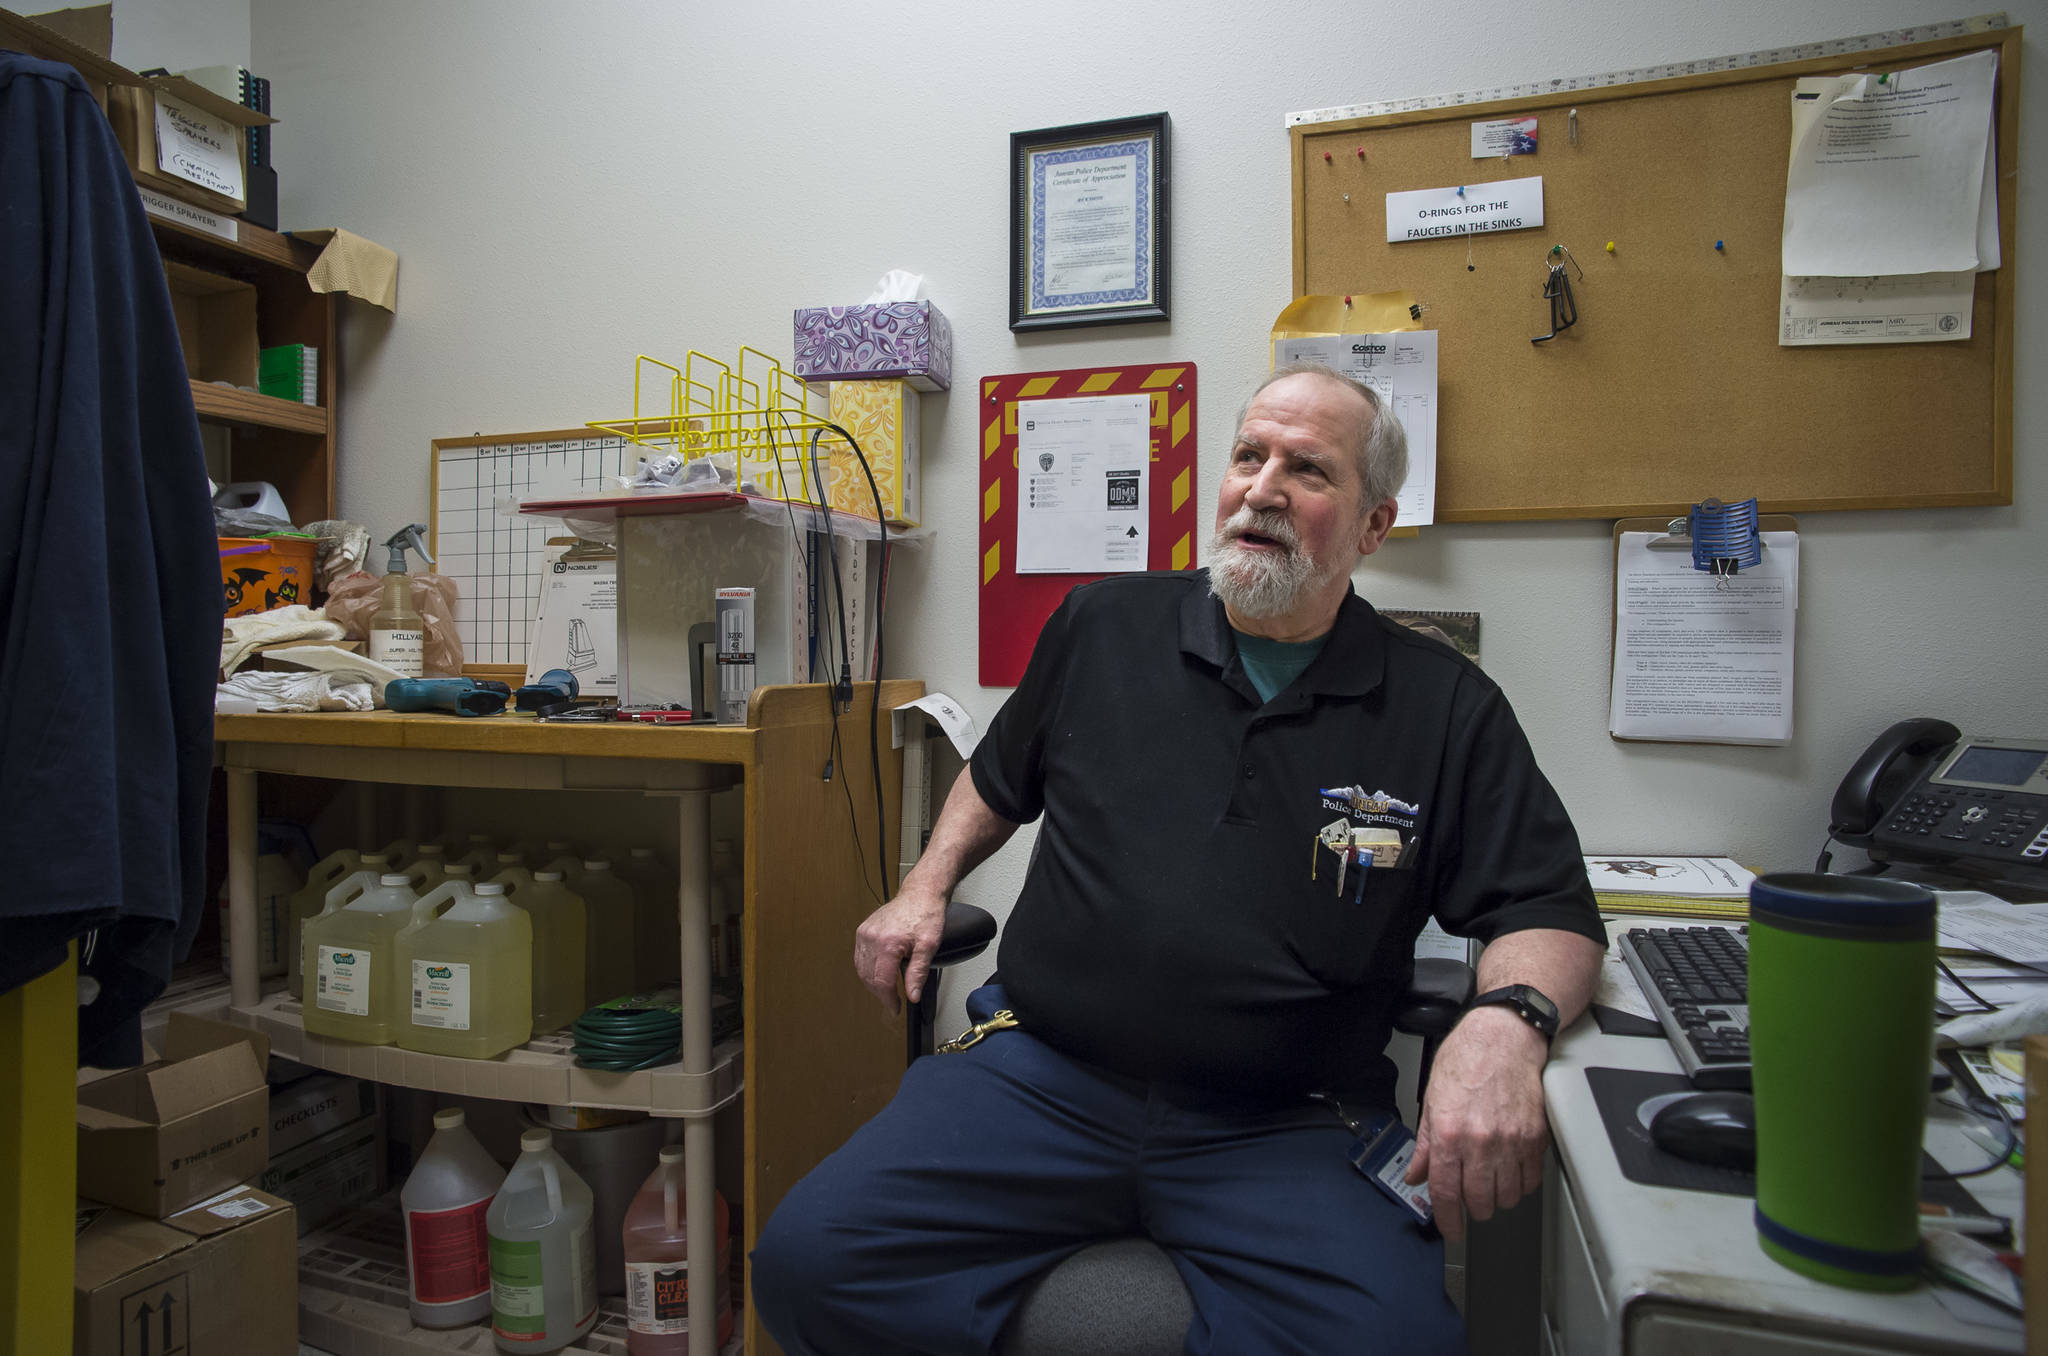 Rick Smith talks about his time as Building Custodian at the Juneau Police Station on Wednesday, May 30, 2018. Smith, who has worked there since the station opened in 2000, retired Thursday, May 31, 2018. (Michael Penn | Juneau Empire)